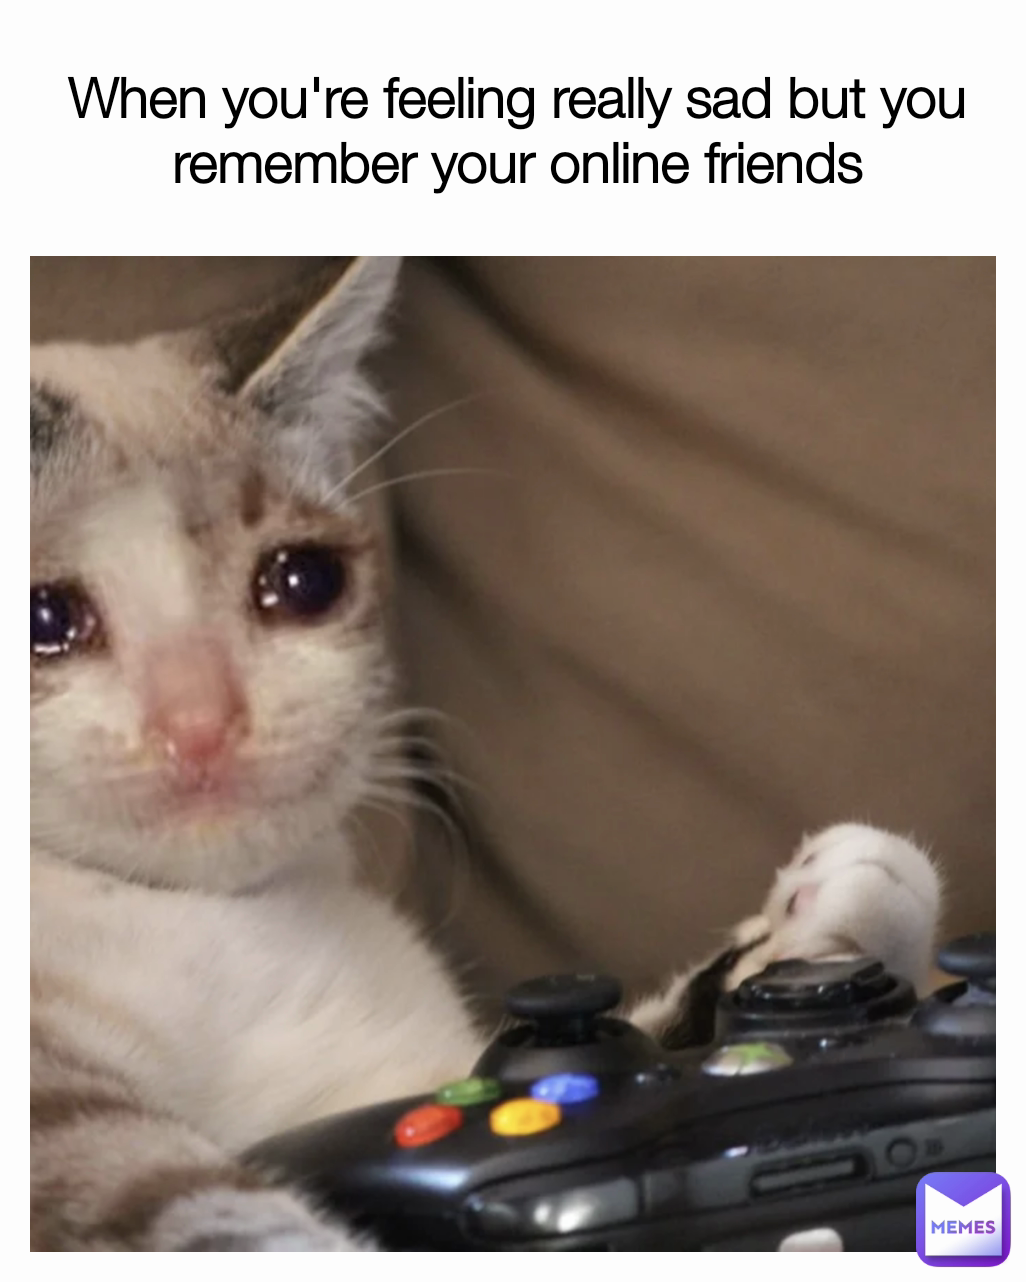 When you're feeling really sad but you remember your online friends